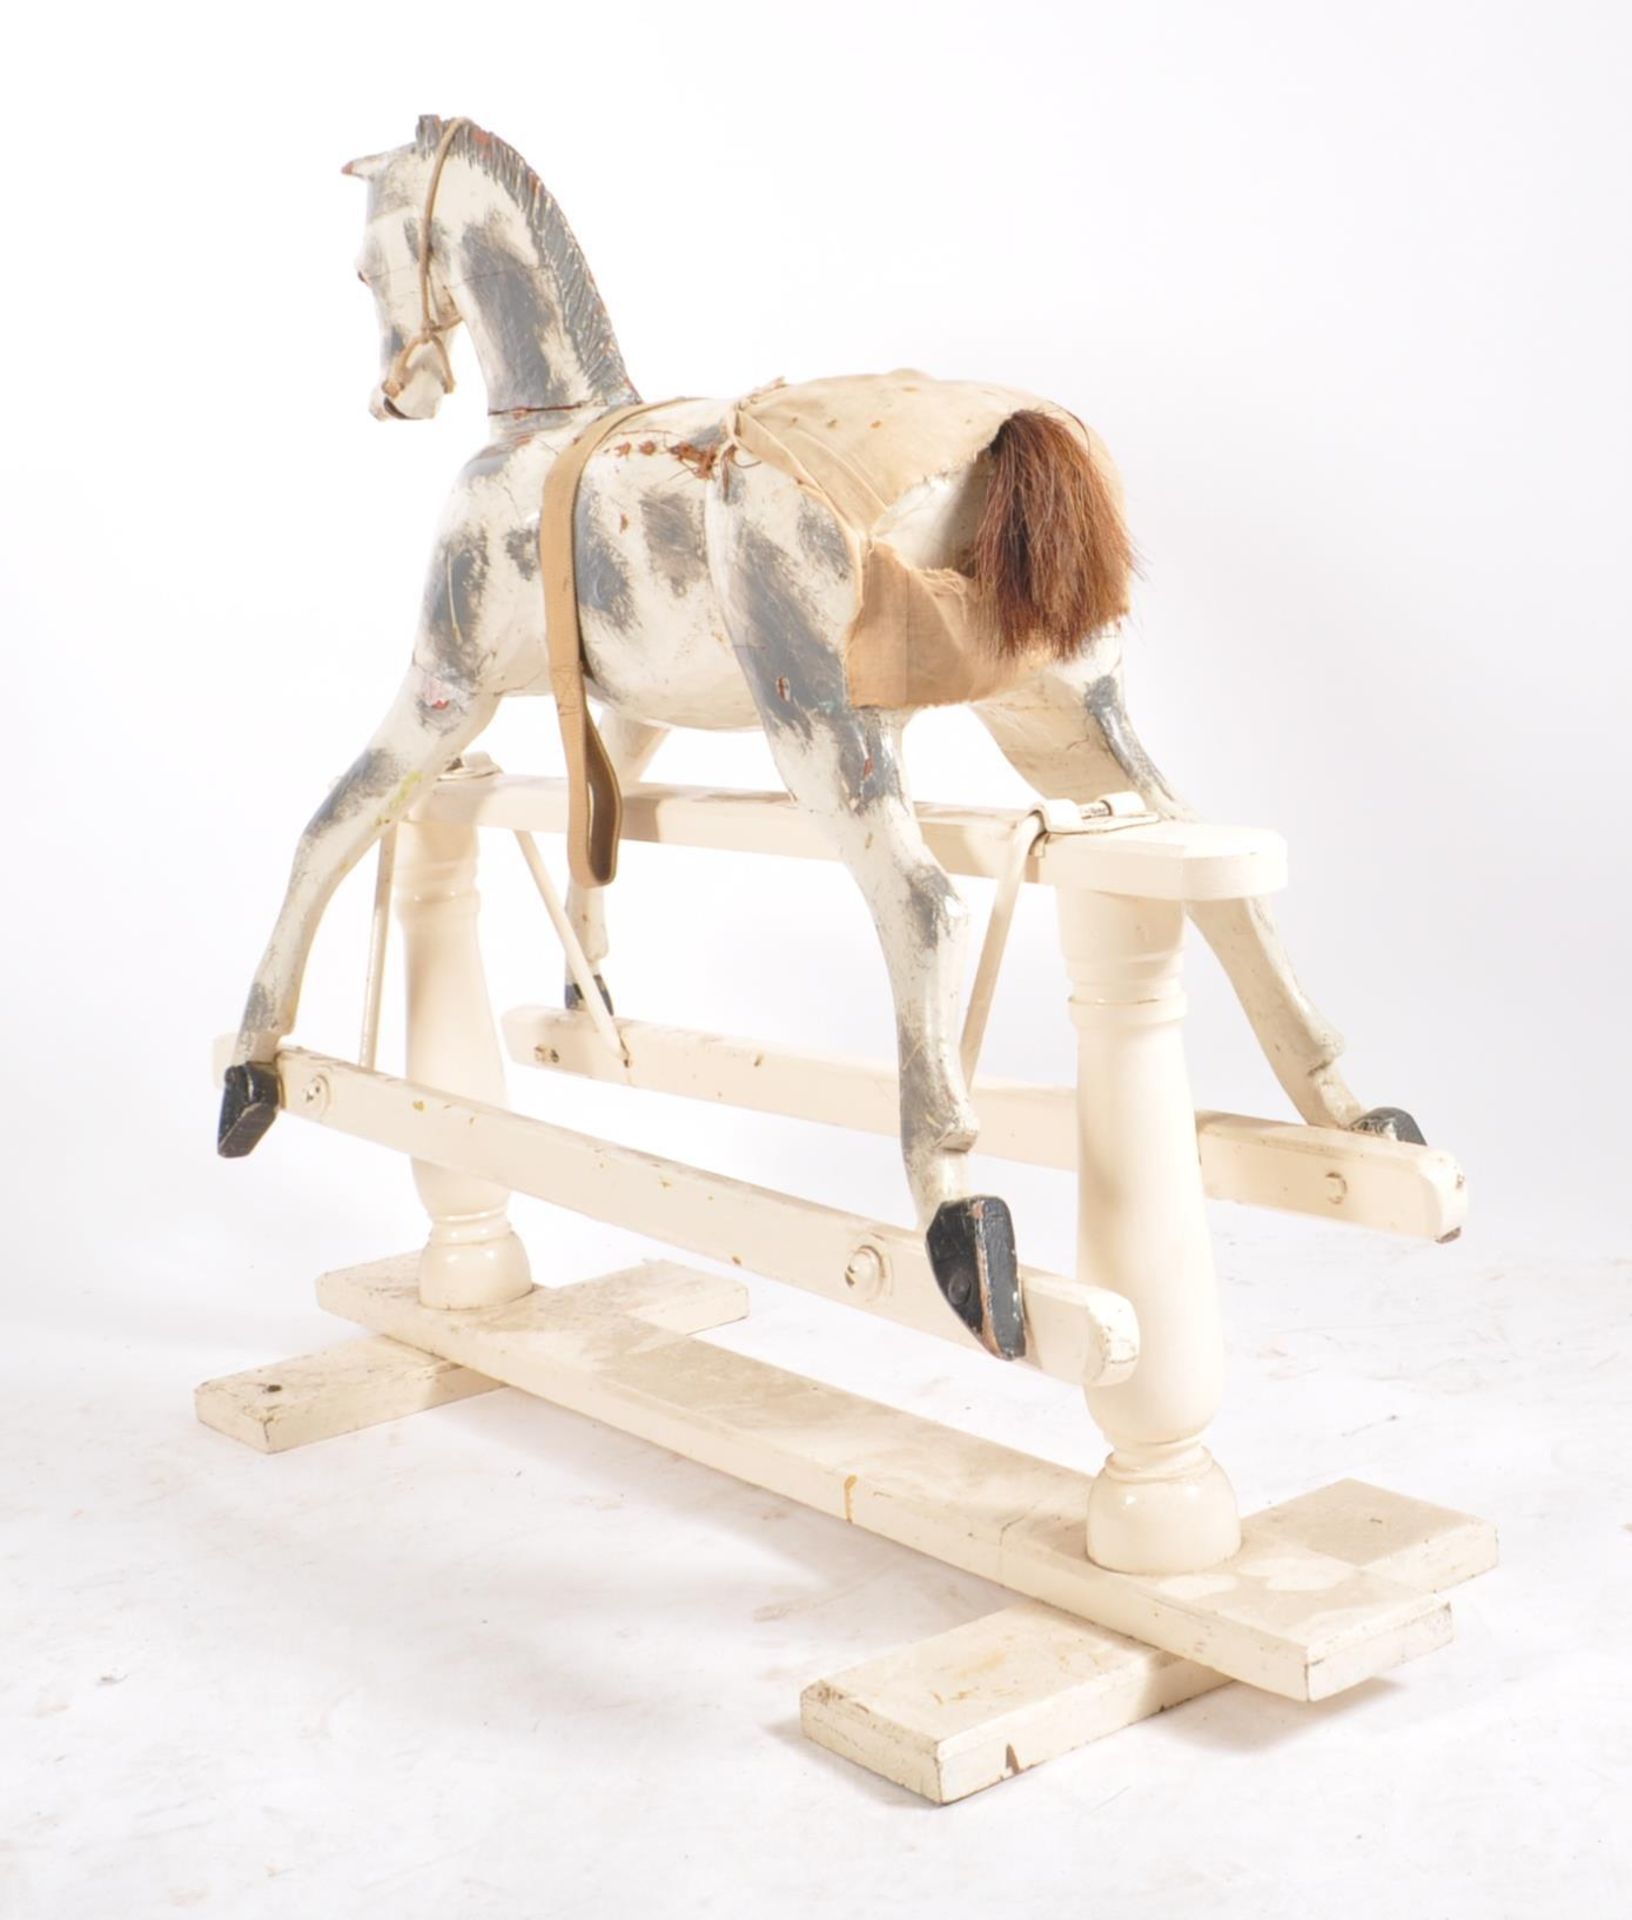 VICTORIAN STYLE MID 20TH CENTURY WOODEN CHILD'S ROCKING HORSE - Image 5 of 5